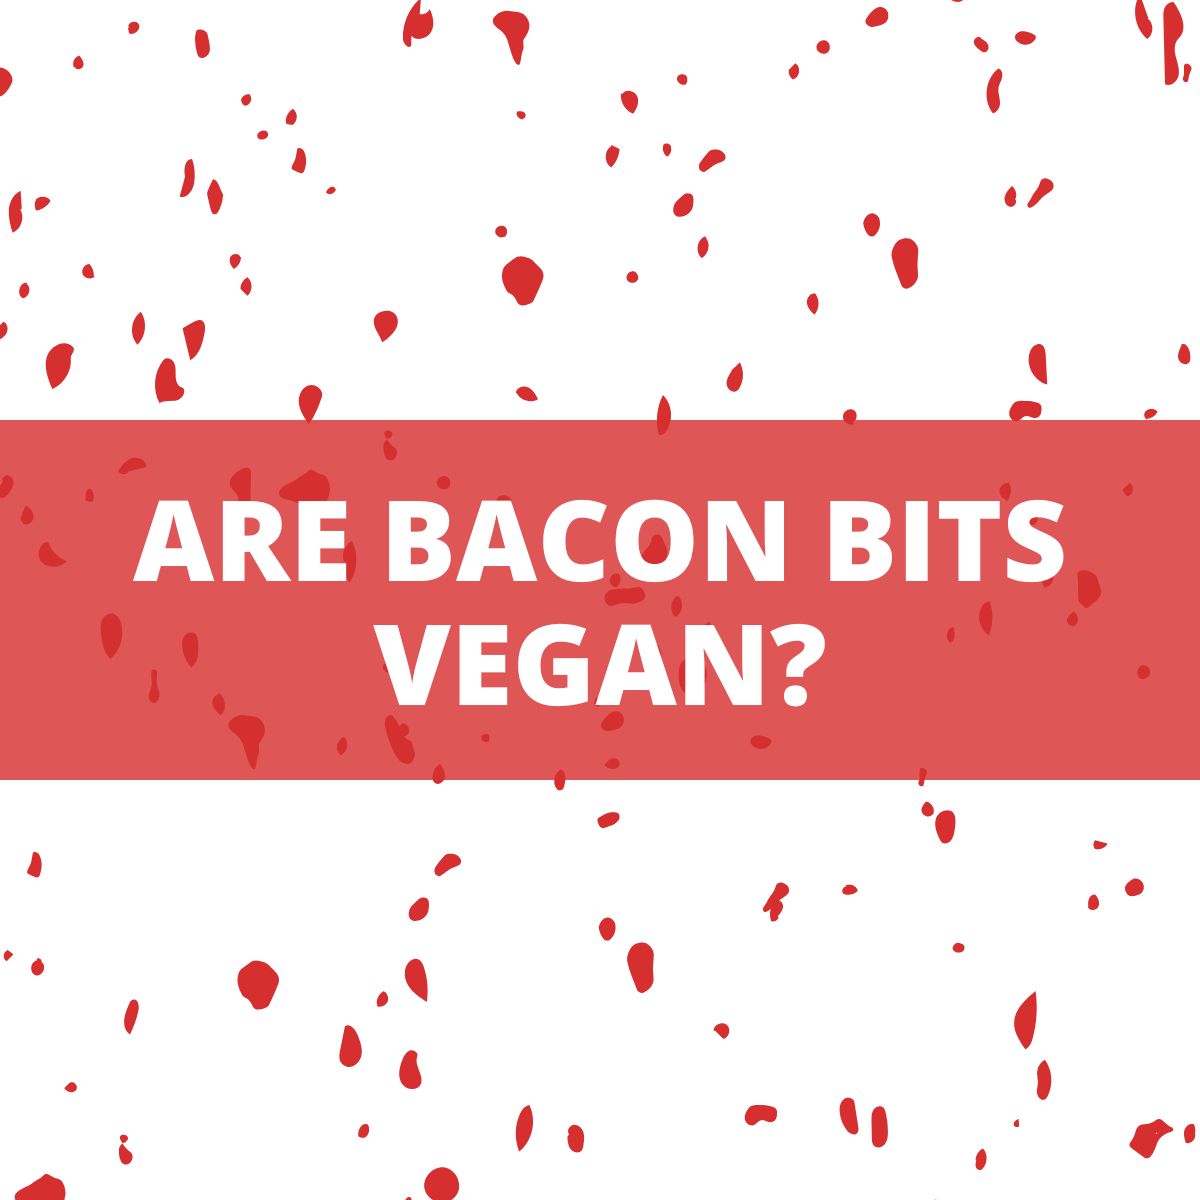 Red dots on a white background and text that says Are Bacon Bits Vegan?